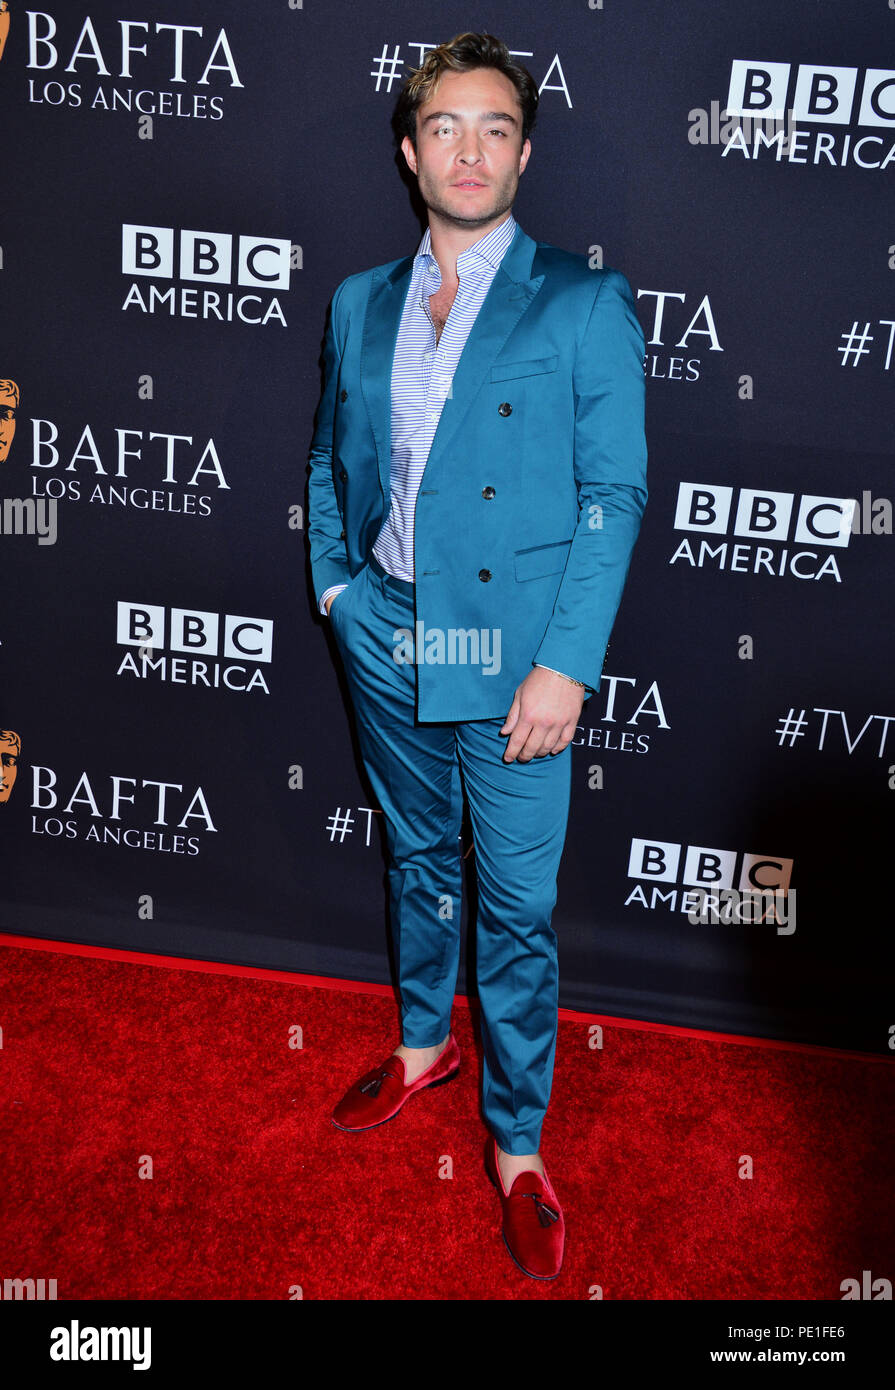 Ed Westwick 023 at The BAFTA Los Angeles TV Tea 2015 at the SLS Hotel in Los Angeles. September, 19, 2015.Ed Westwick 023  Event in Hollywood Life - California, Red Carpet Event, USA, Film Industry, Celebrities, Photography, Bestof, Arts Culture and Entertainment, Topix Celebrities fashion, Best of, Hollywood Life, Event in Hollywood Life - California, Red Carpet and backstage, movie celebrities, TV celebrities, Music celebrities, Topix, Bestof, Arts Culture and Entertainment, vertical, one person, Photography,   Fashion, full length, 2015 inquiry tsuni@Gamma-USA.com , Credit Tsuni / USA, Stock Photo